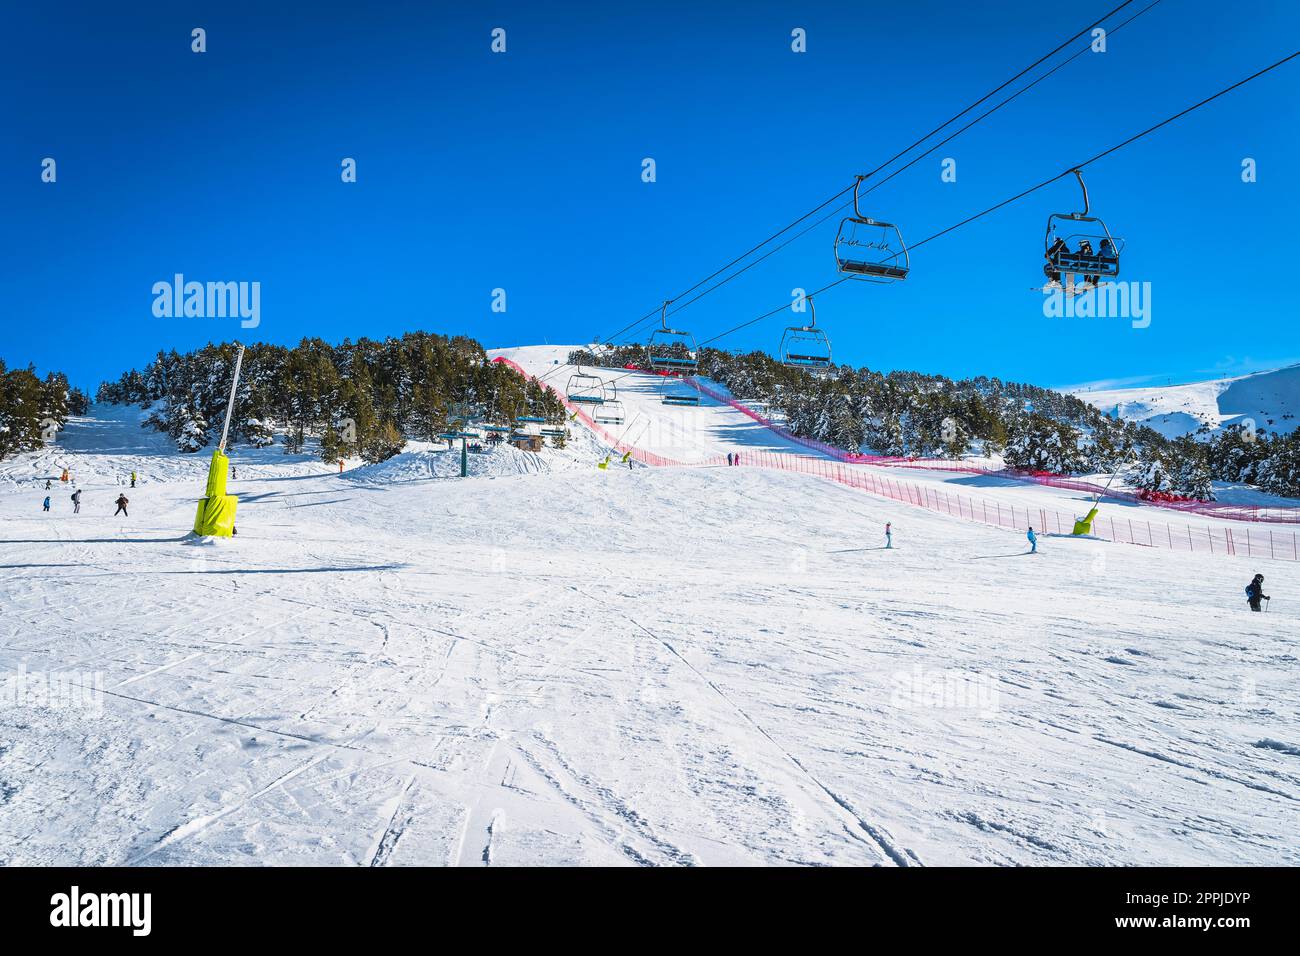 People riding up on a ski chair lift and skiing and snowboarding down on the ski slope, Andorra Stock Photo